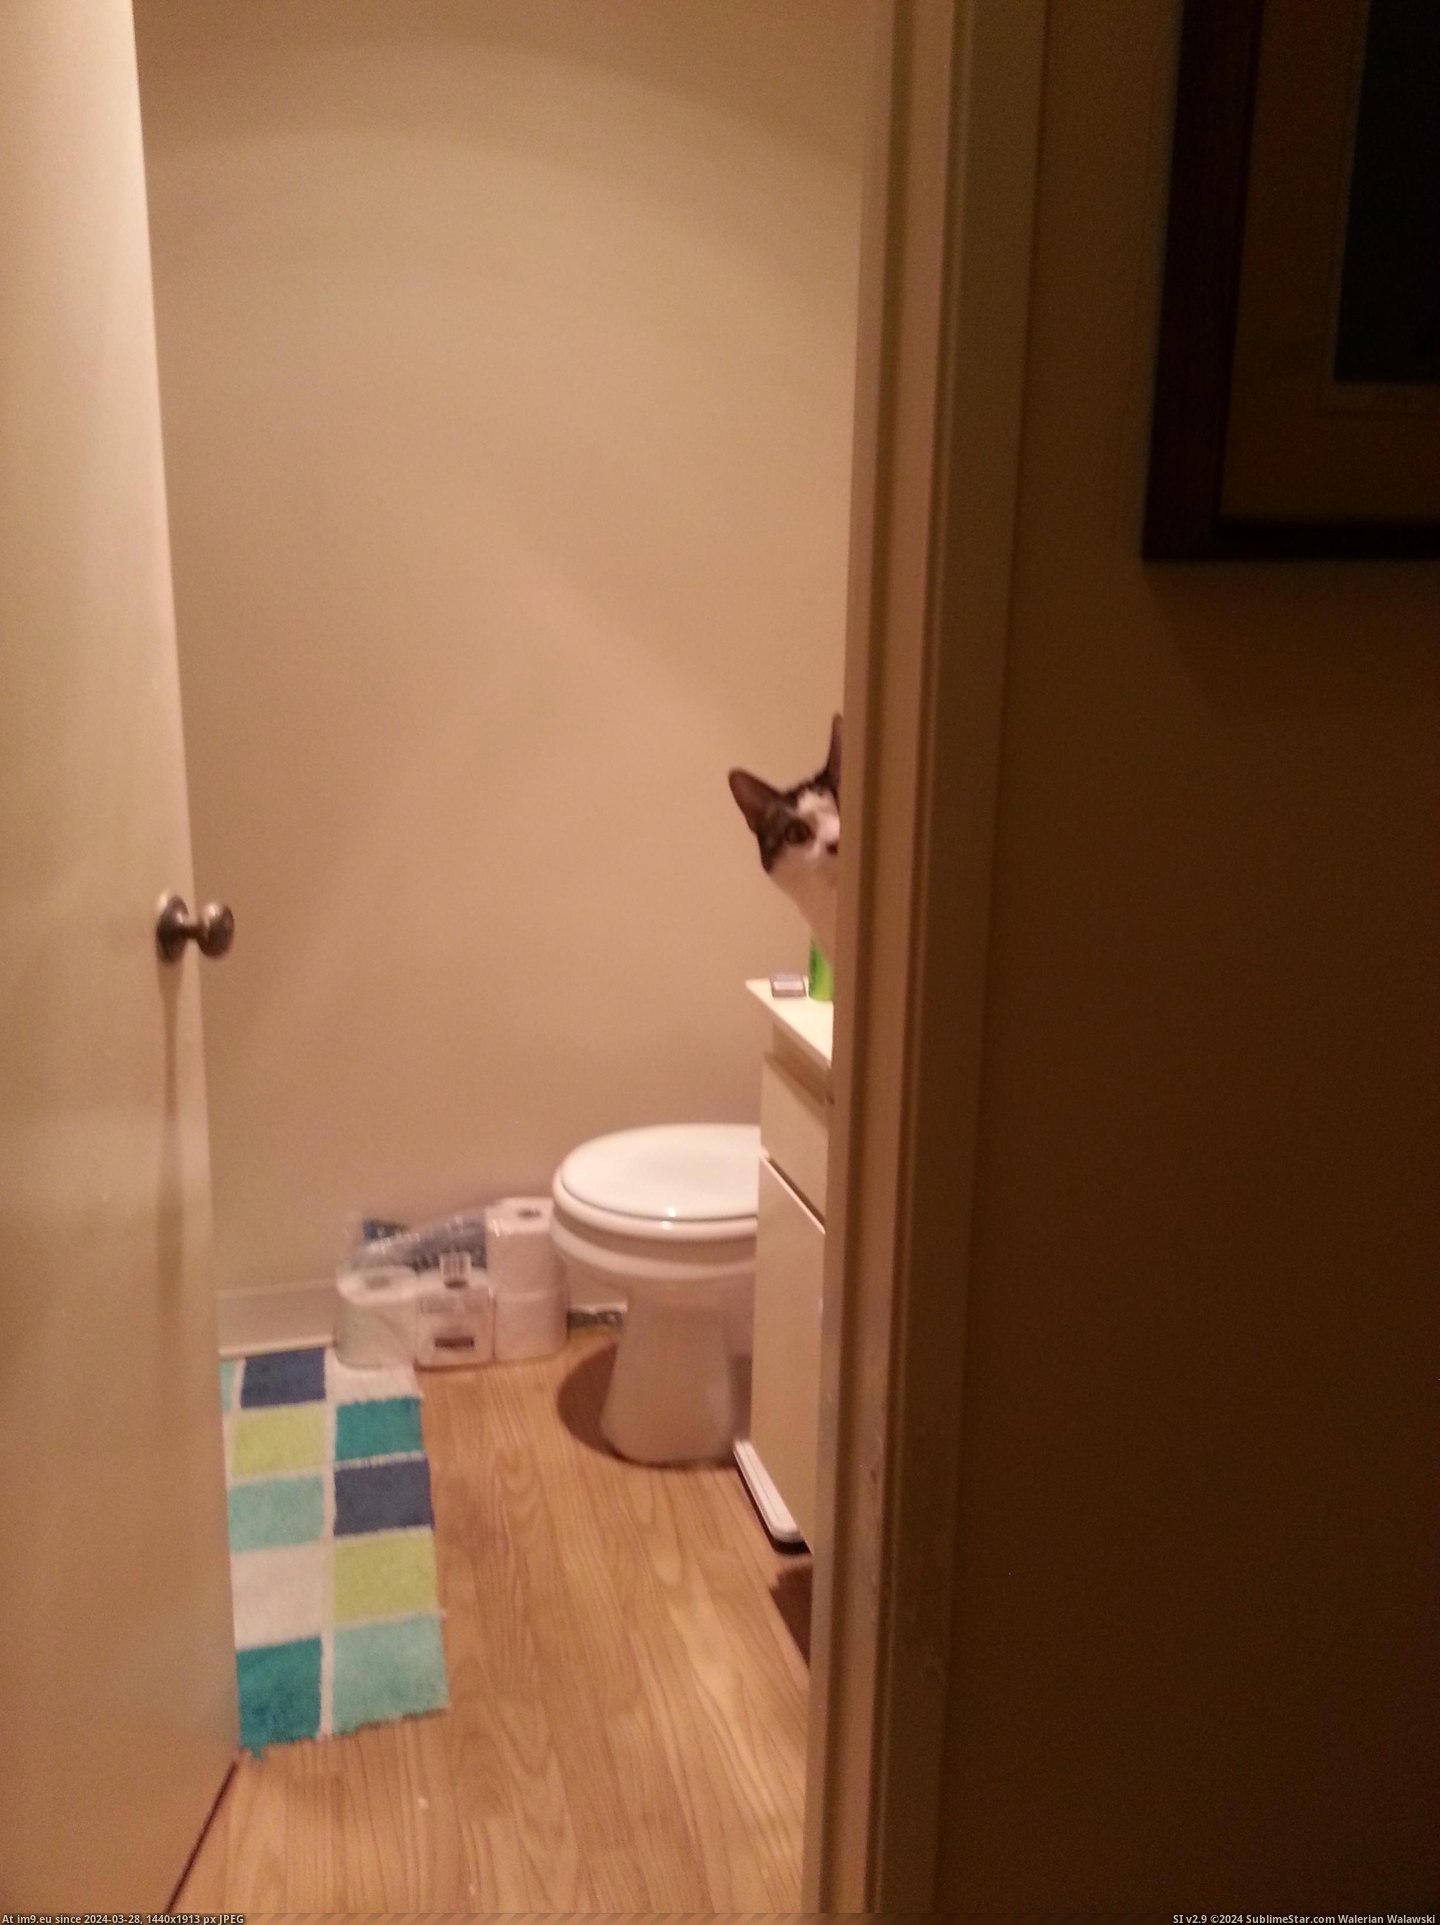 #Cats #For #Cat #Him #Run #Way #Water #Bathroom [Cats] This is my cat's way of asking me to run the water for him in the bathroom Pic. (Obraz z album My r/CATS favs))